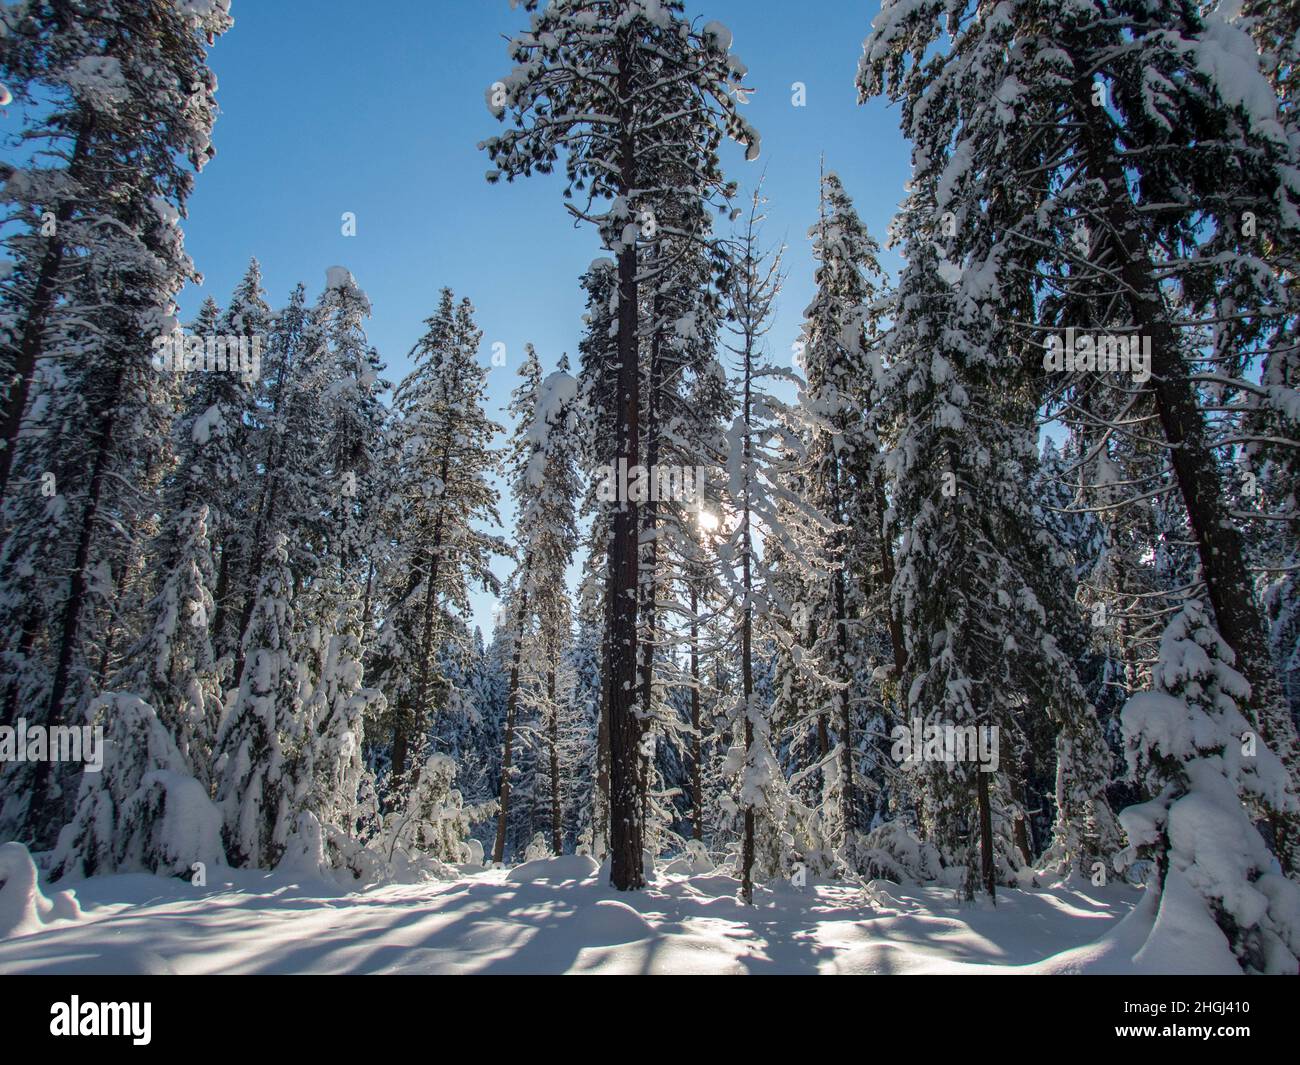 A winter scene with the snow-covered forest at Lake Wenatchee State Park in eastern Washington State, USA. Stock Photo